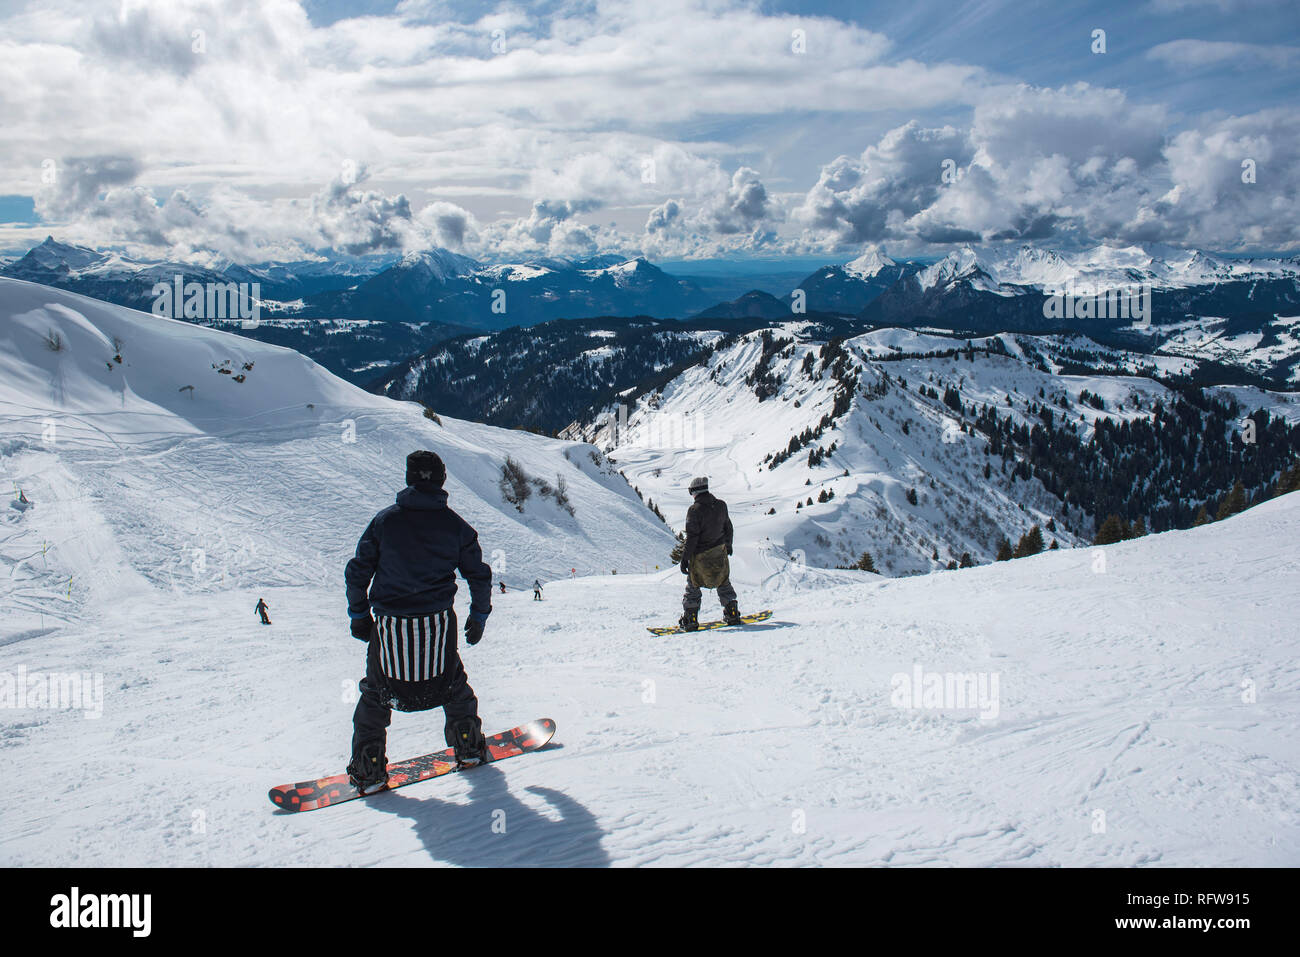 Snowboarders in the Morzine Ski Area, Port du Soleil, Auvergne Rhone Alpes, French Alps, France, Europe Stock Photo